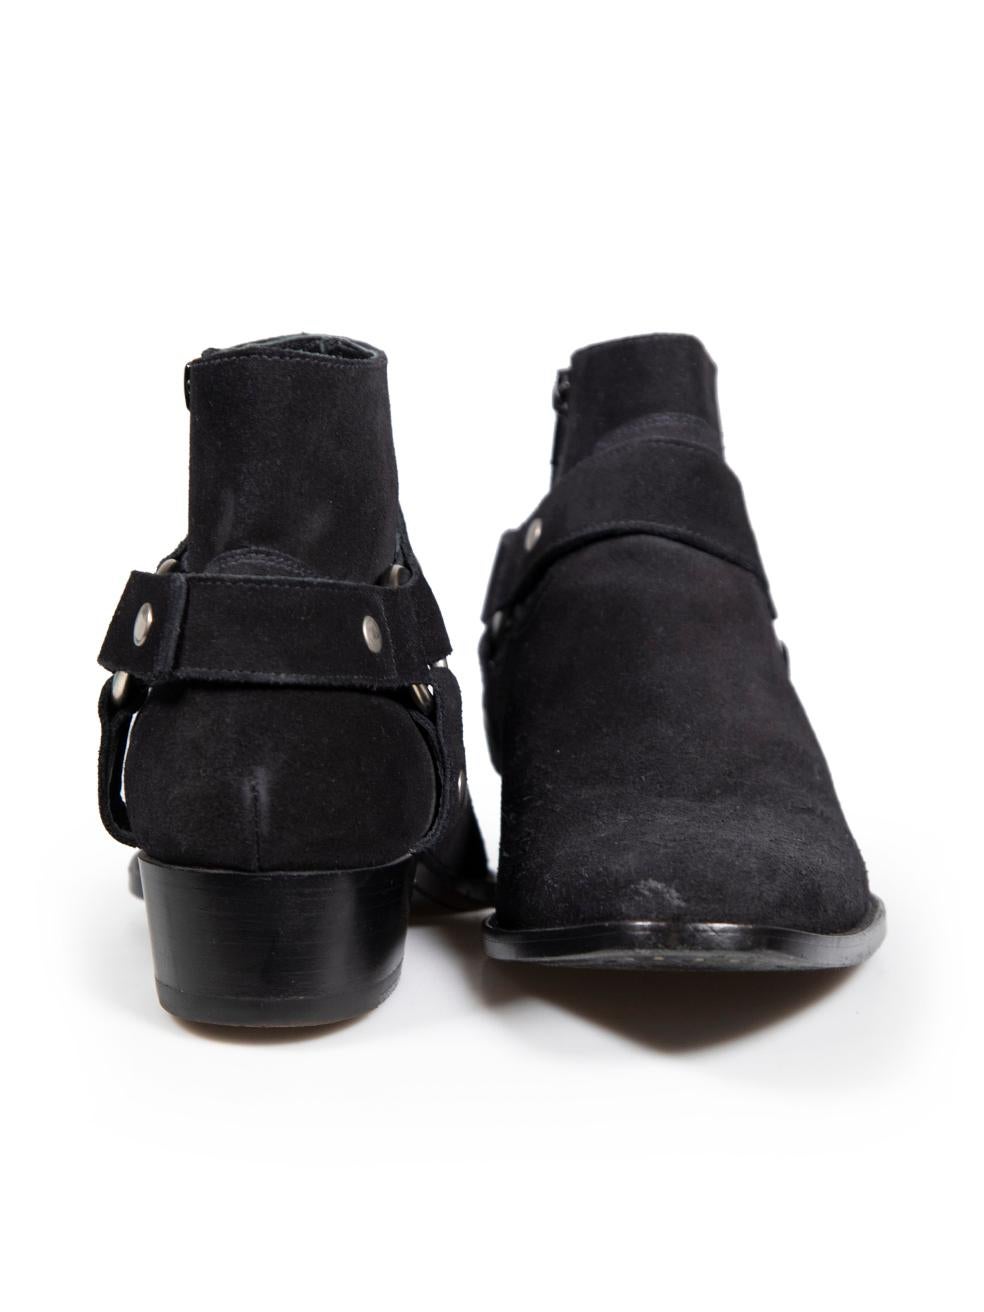 Saint Laurent Black Suede Wyatt Buckled Boots Size IT 40 In Good Condition For Sale In London, GB